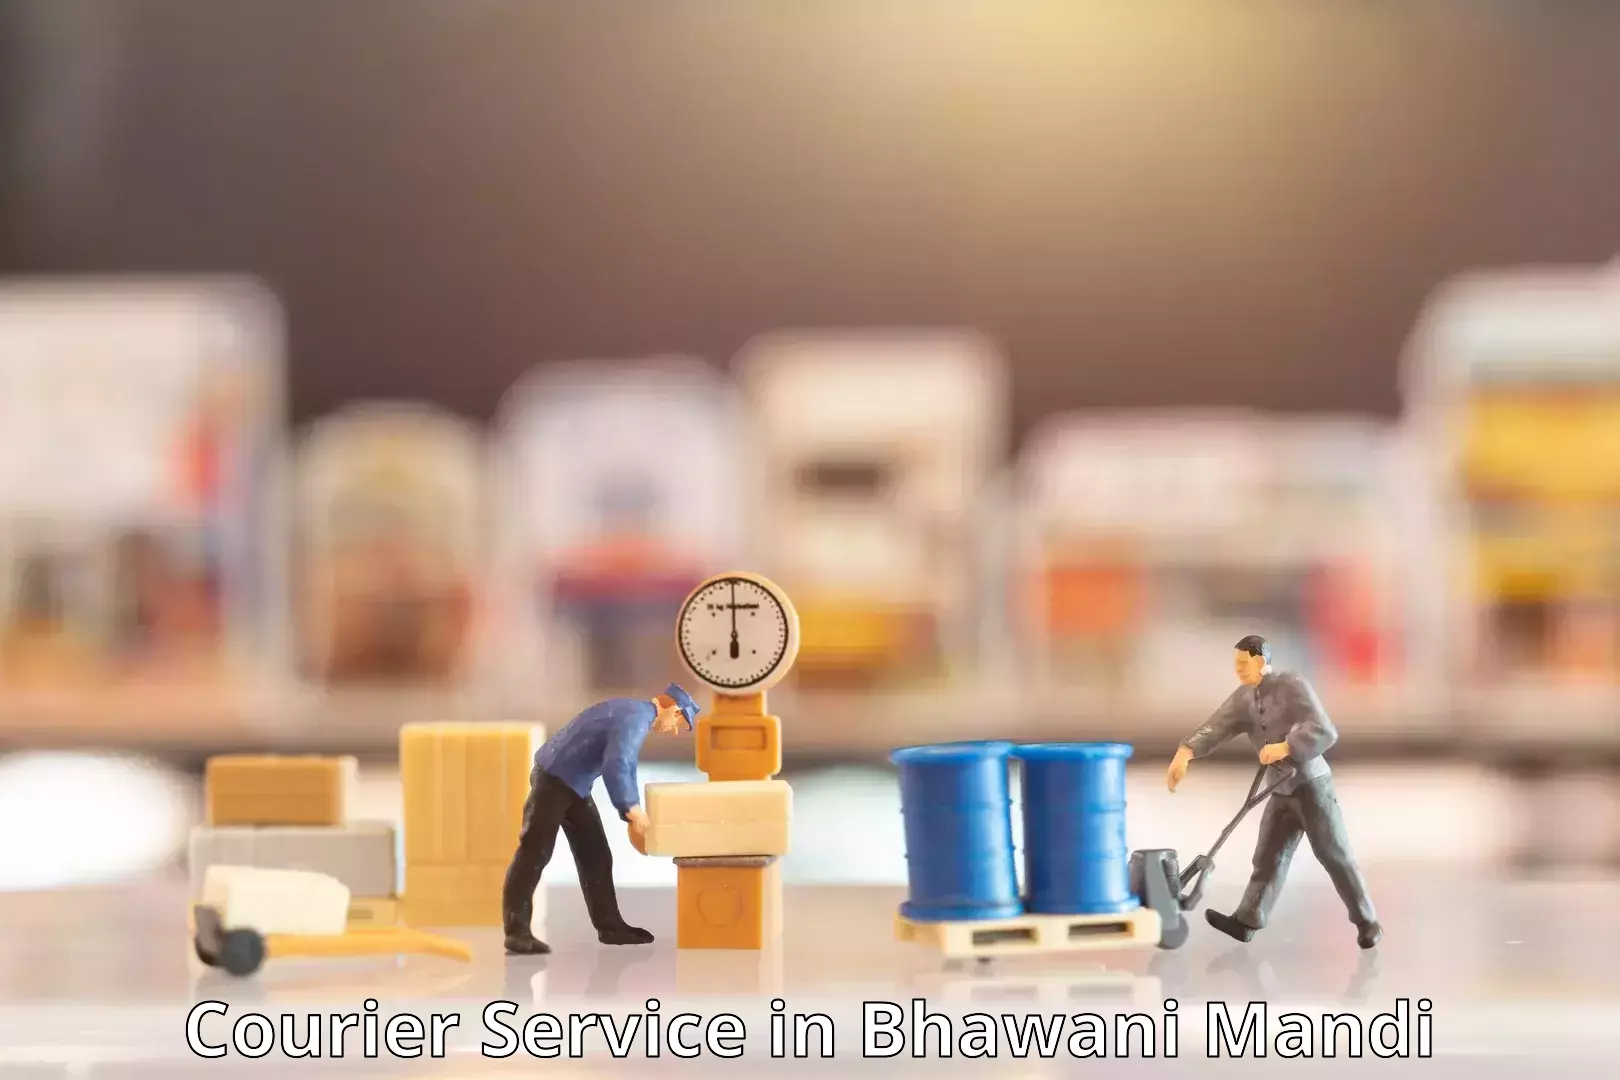 Personal parcel delivery in Bhawani Mandi